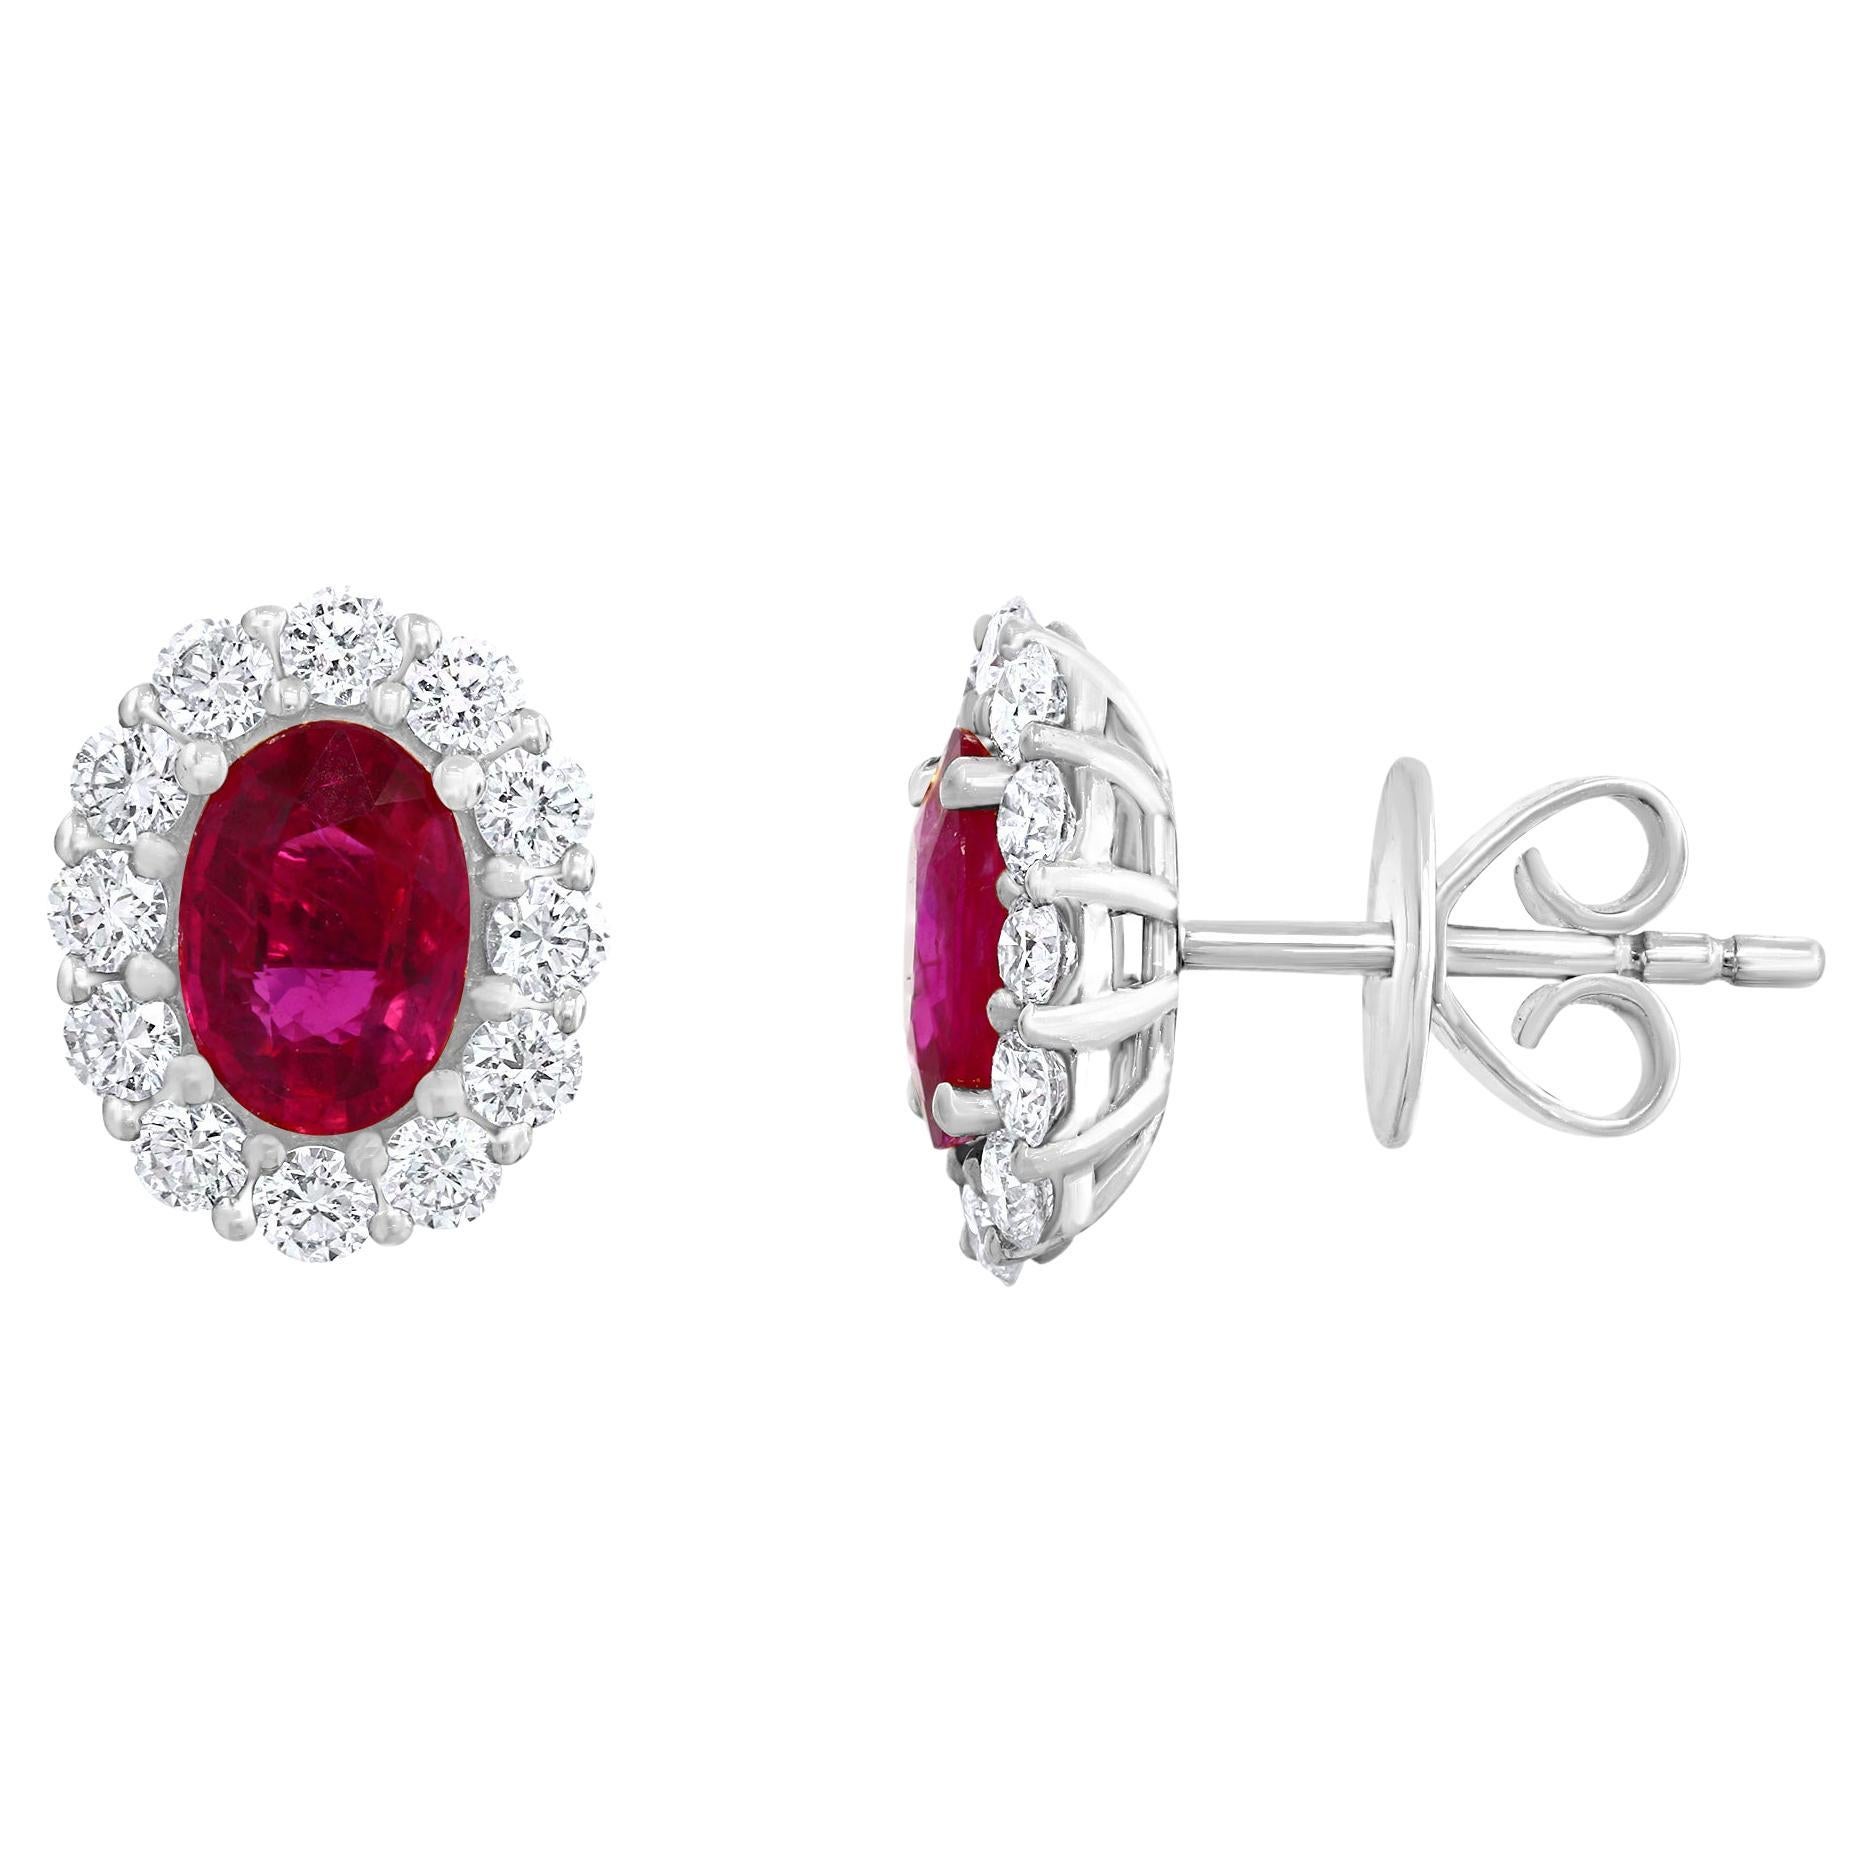 1.45 Carat Oval Cut Ruby and Diamond Stud Earrings in 18K White Gold